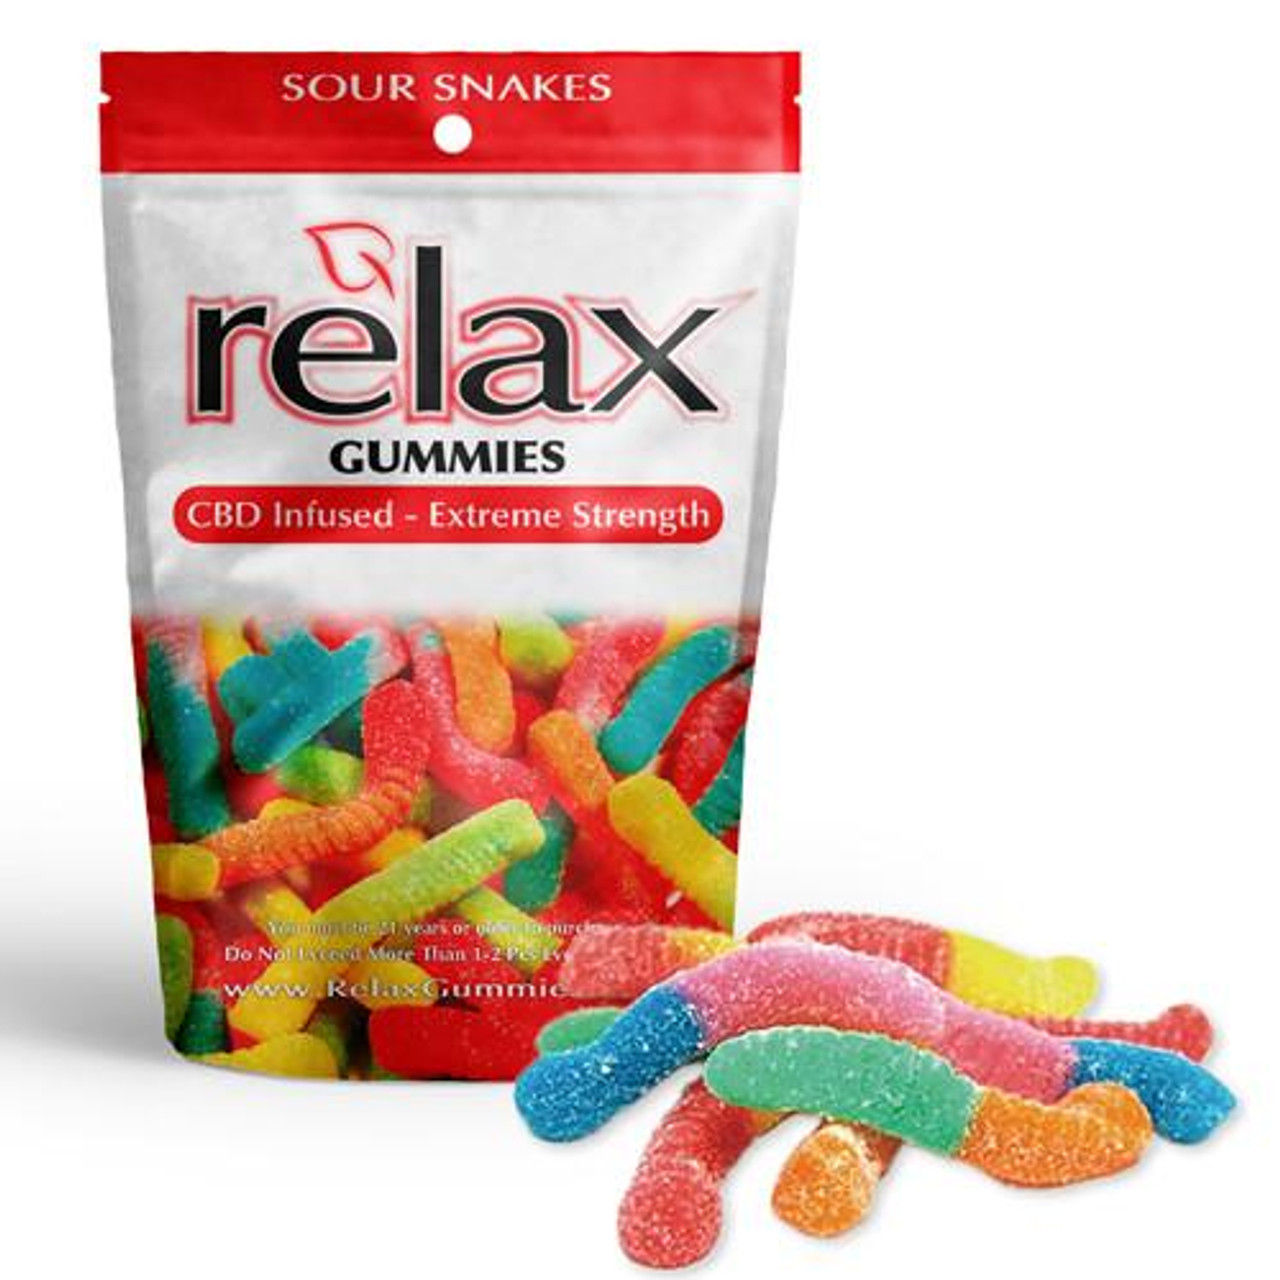 Infused_Sour_Snakes_Edible_Candy__48408.